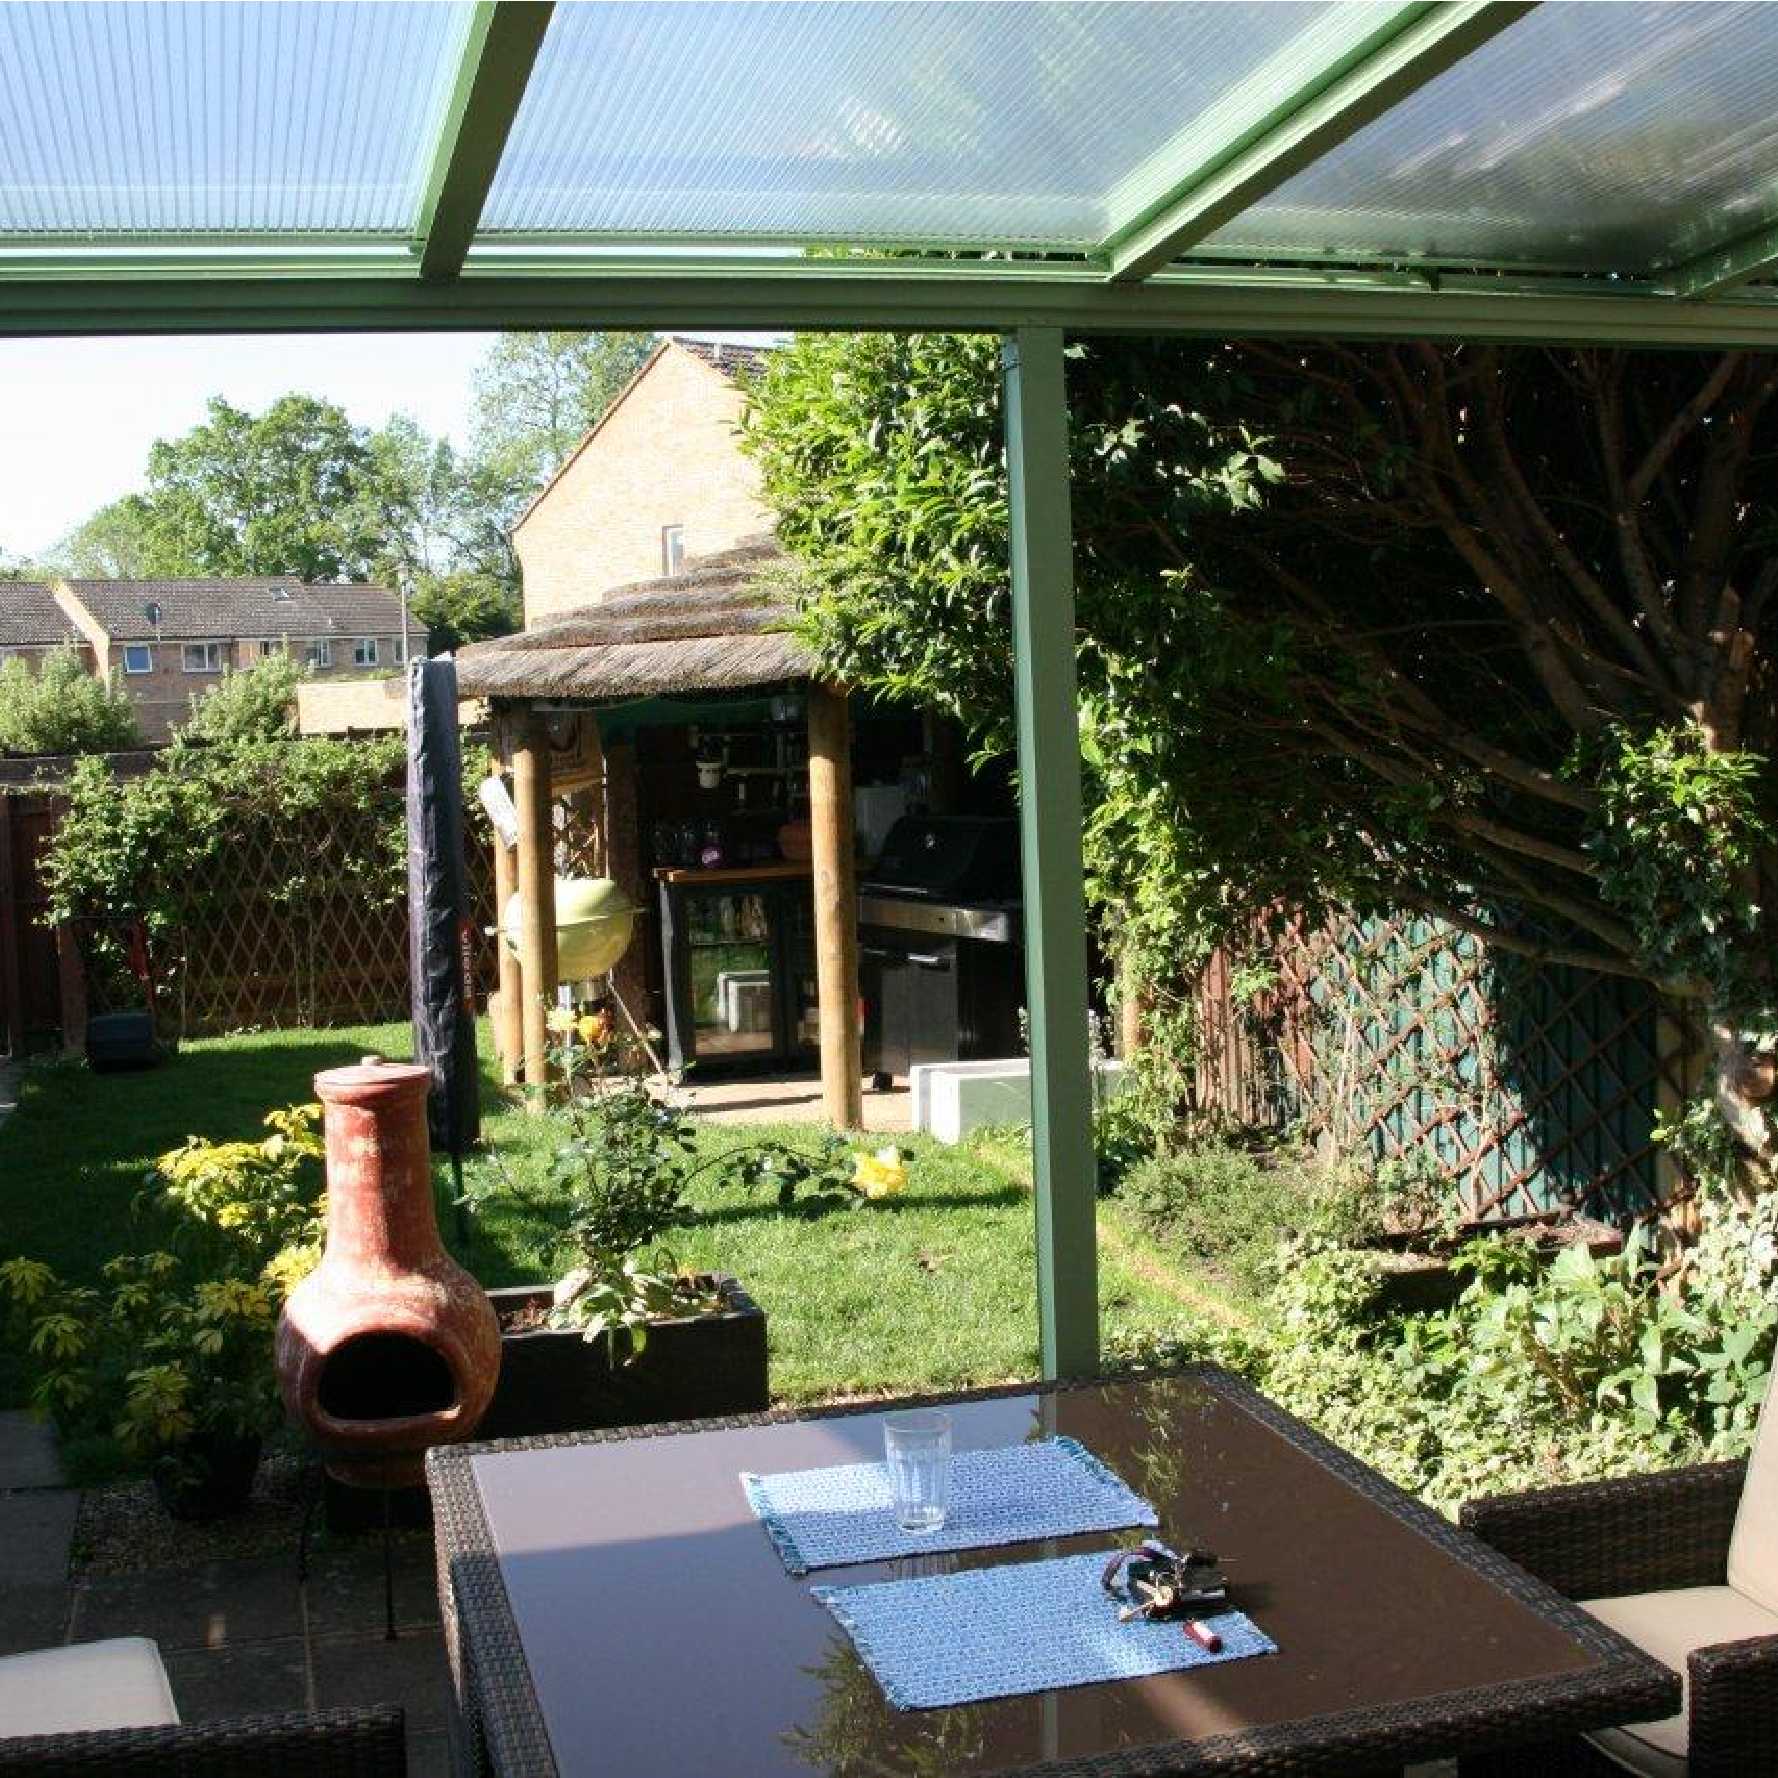 Affordable Omega Smart Lean-To Canopy, White with 16mm Polycarbonate Glazing - 11.6m (W) x 2.5m (P), (5) Supporting Posts